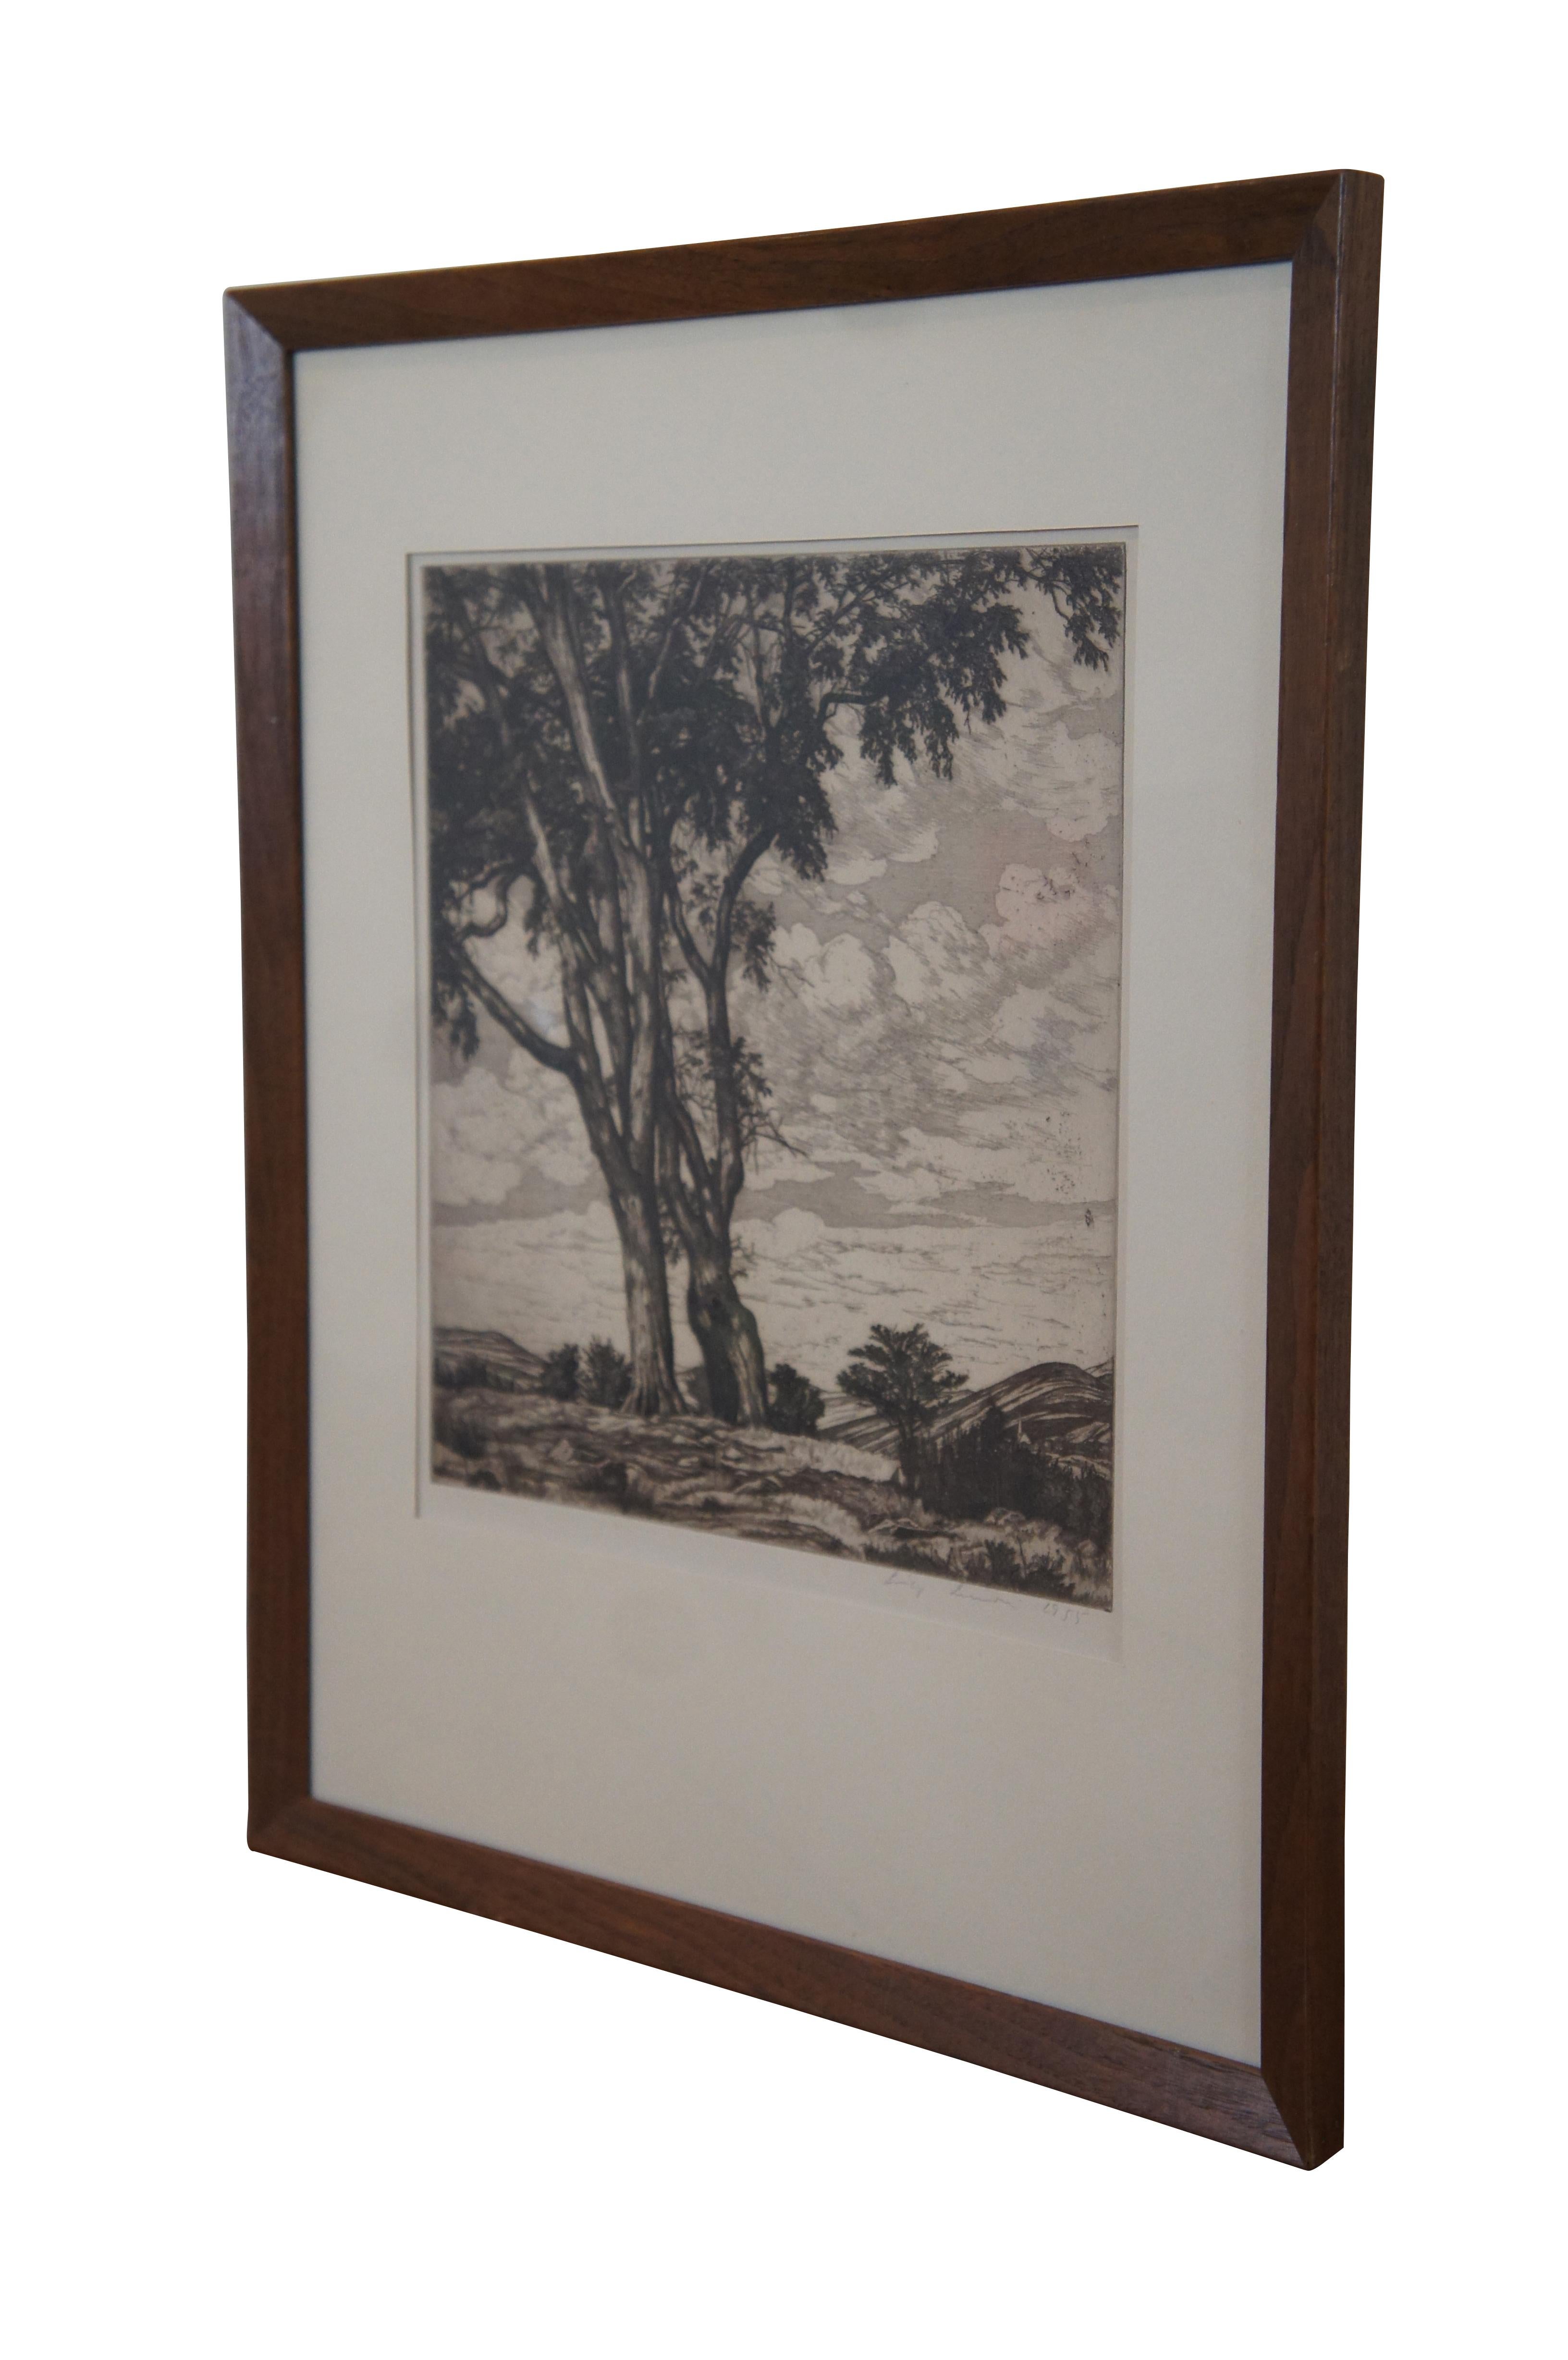 1955 original sepia and white etching by Luigi Lucioni titled “Hilltop Elms,” pencil signed and dated.

“Born in Malnate, Italy, in 1900, Luigi Lucioni became one of America's well-known landscape painters, whose work has been noted for its